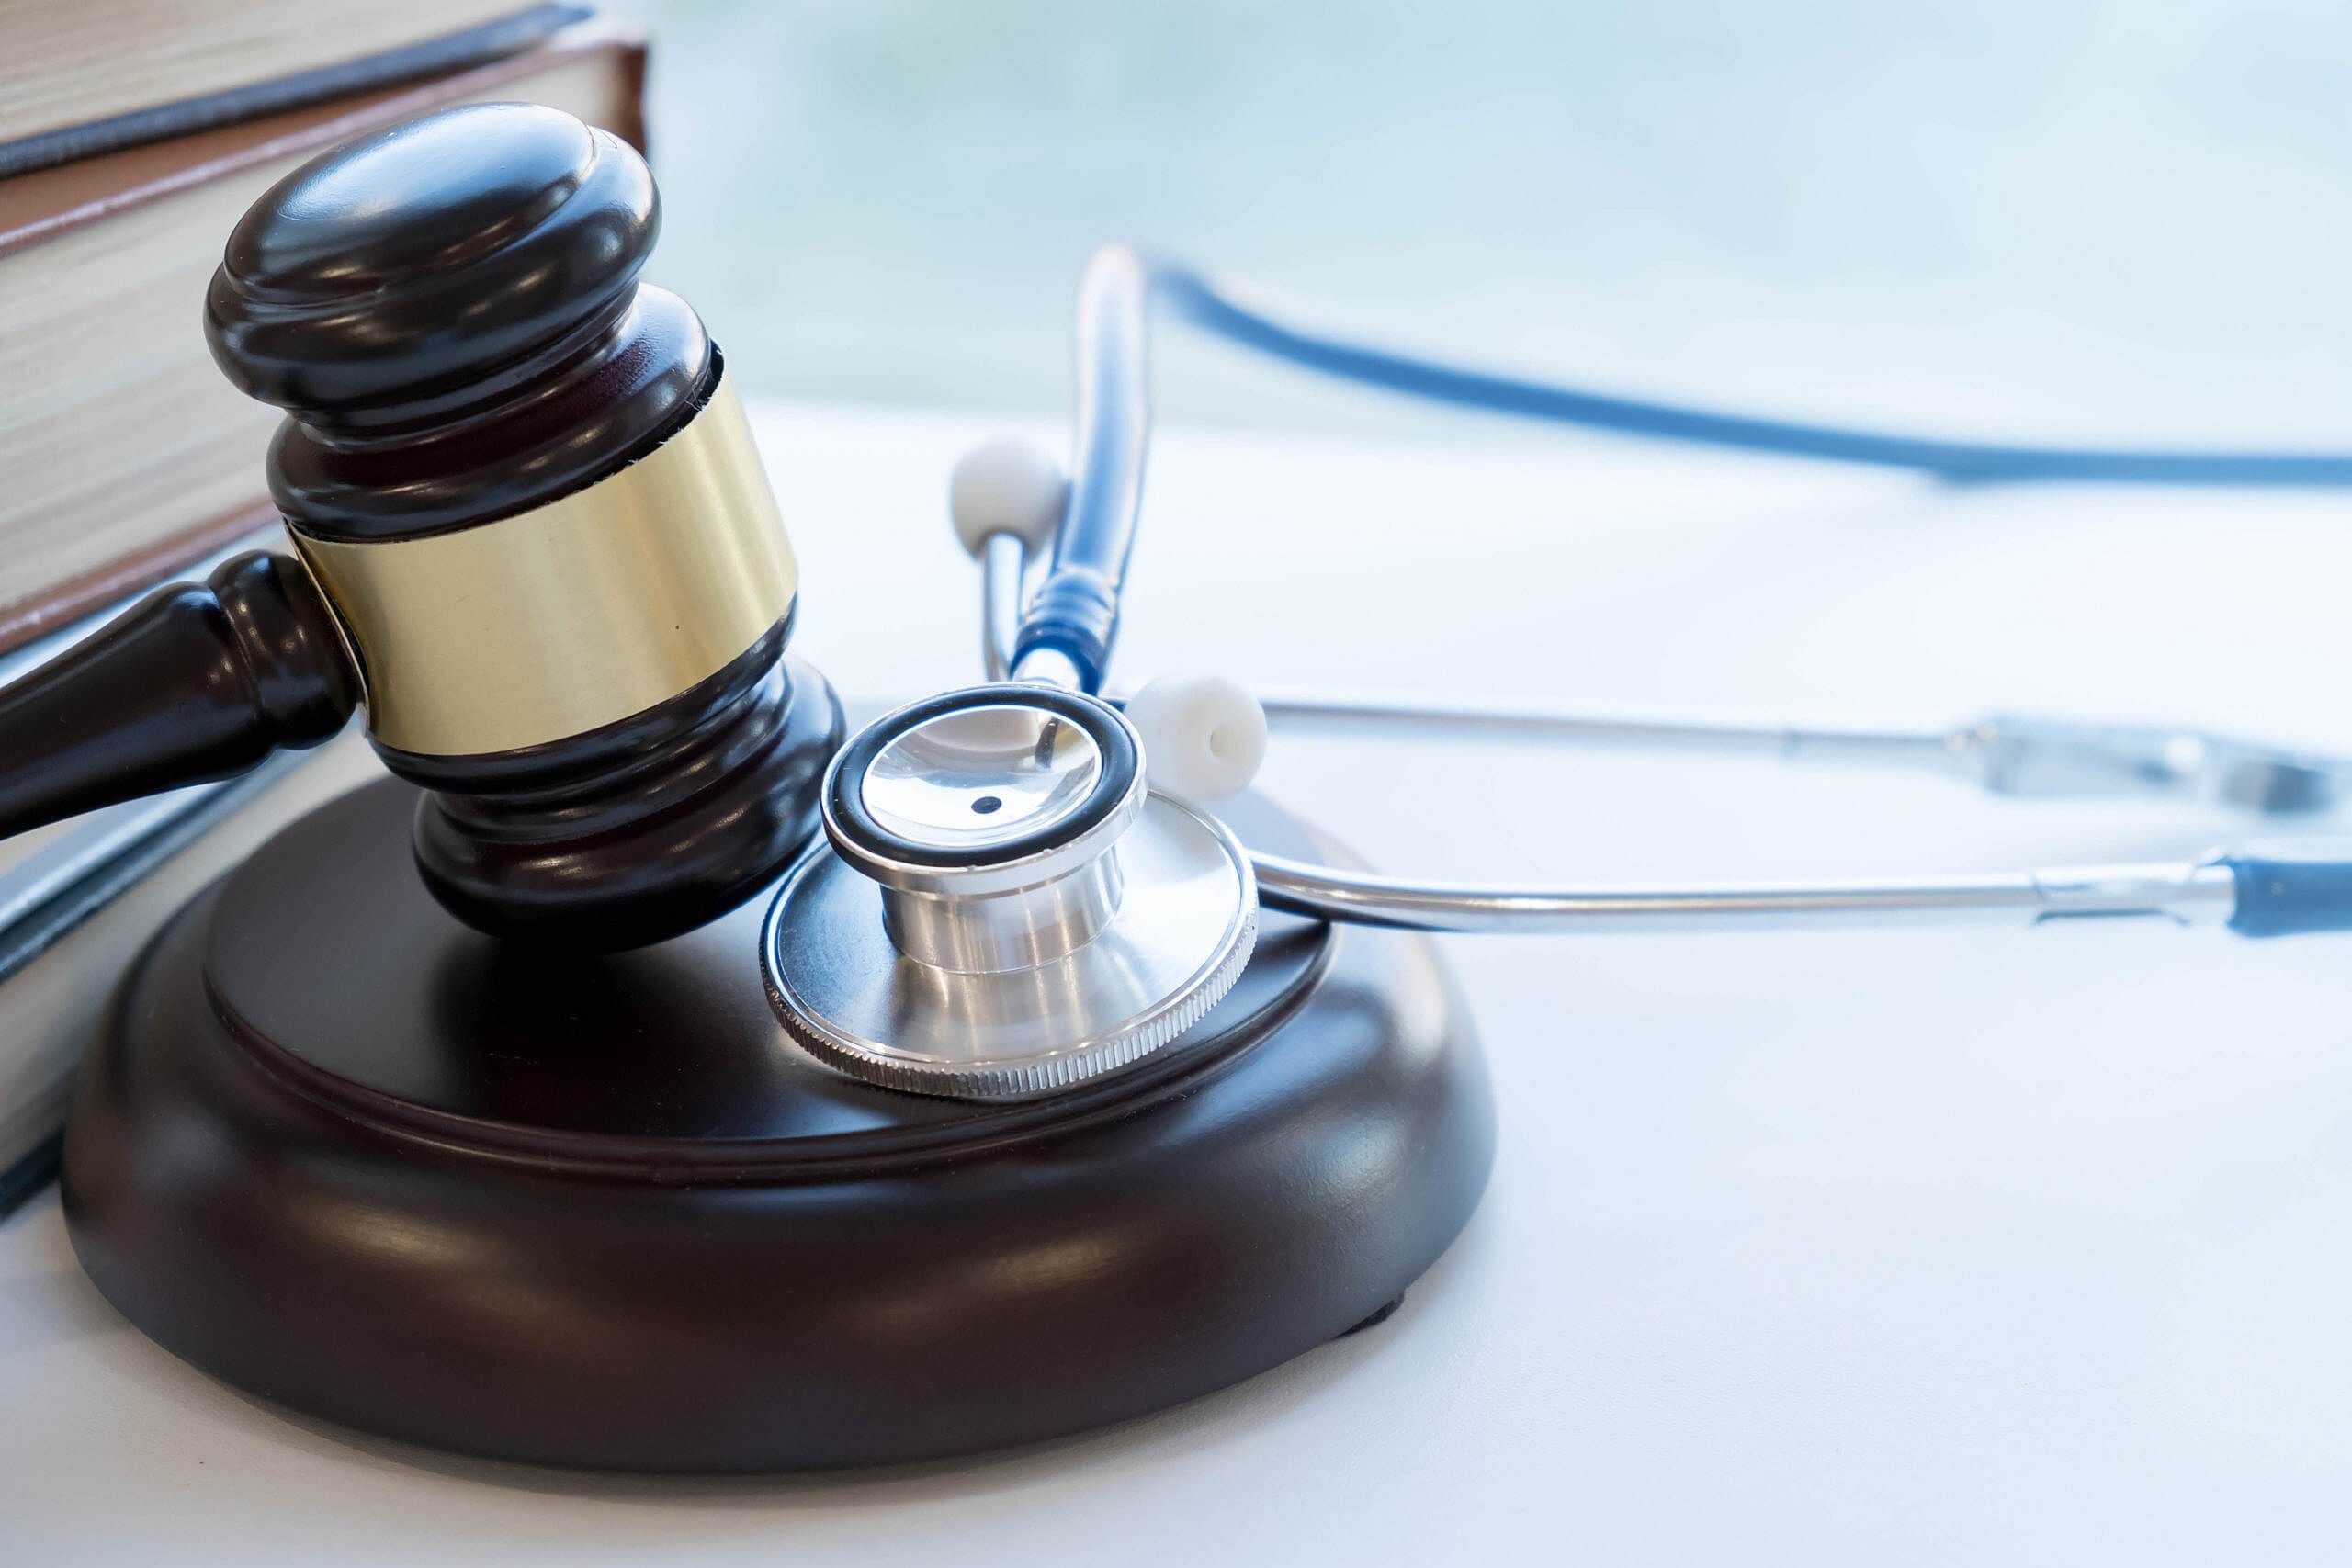 Stethoscope and gavel, representing medical malpractice